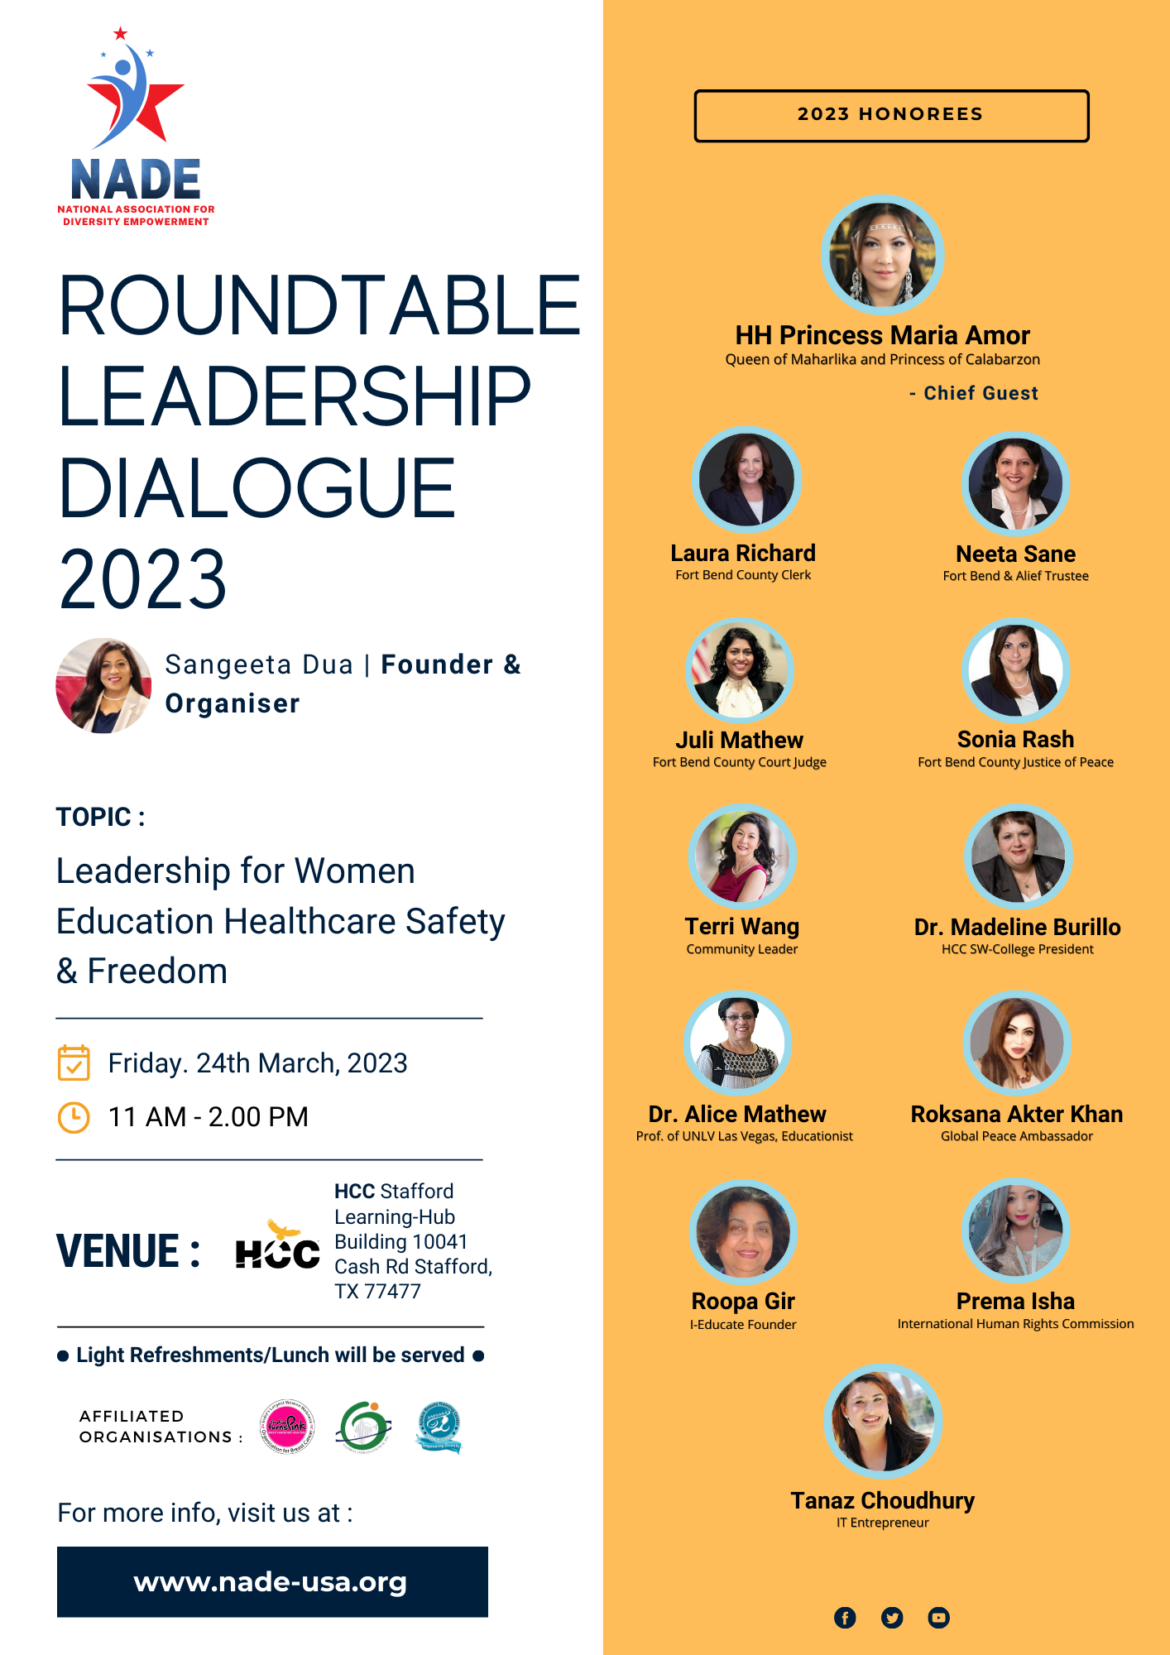 Roundtable Leadership Dialogue 2023